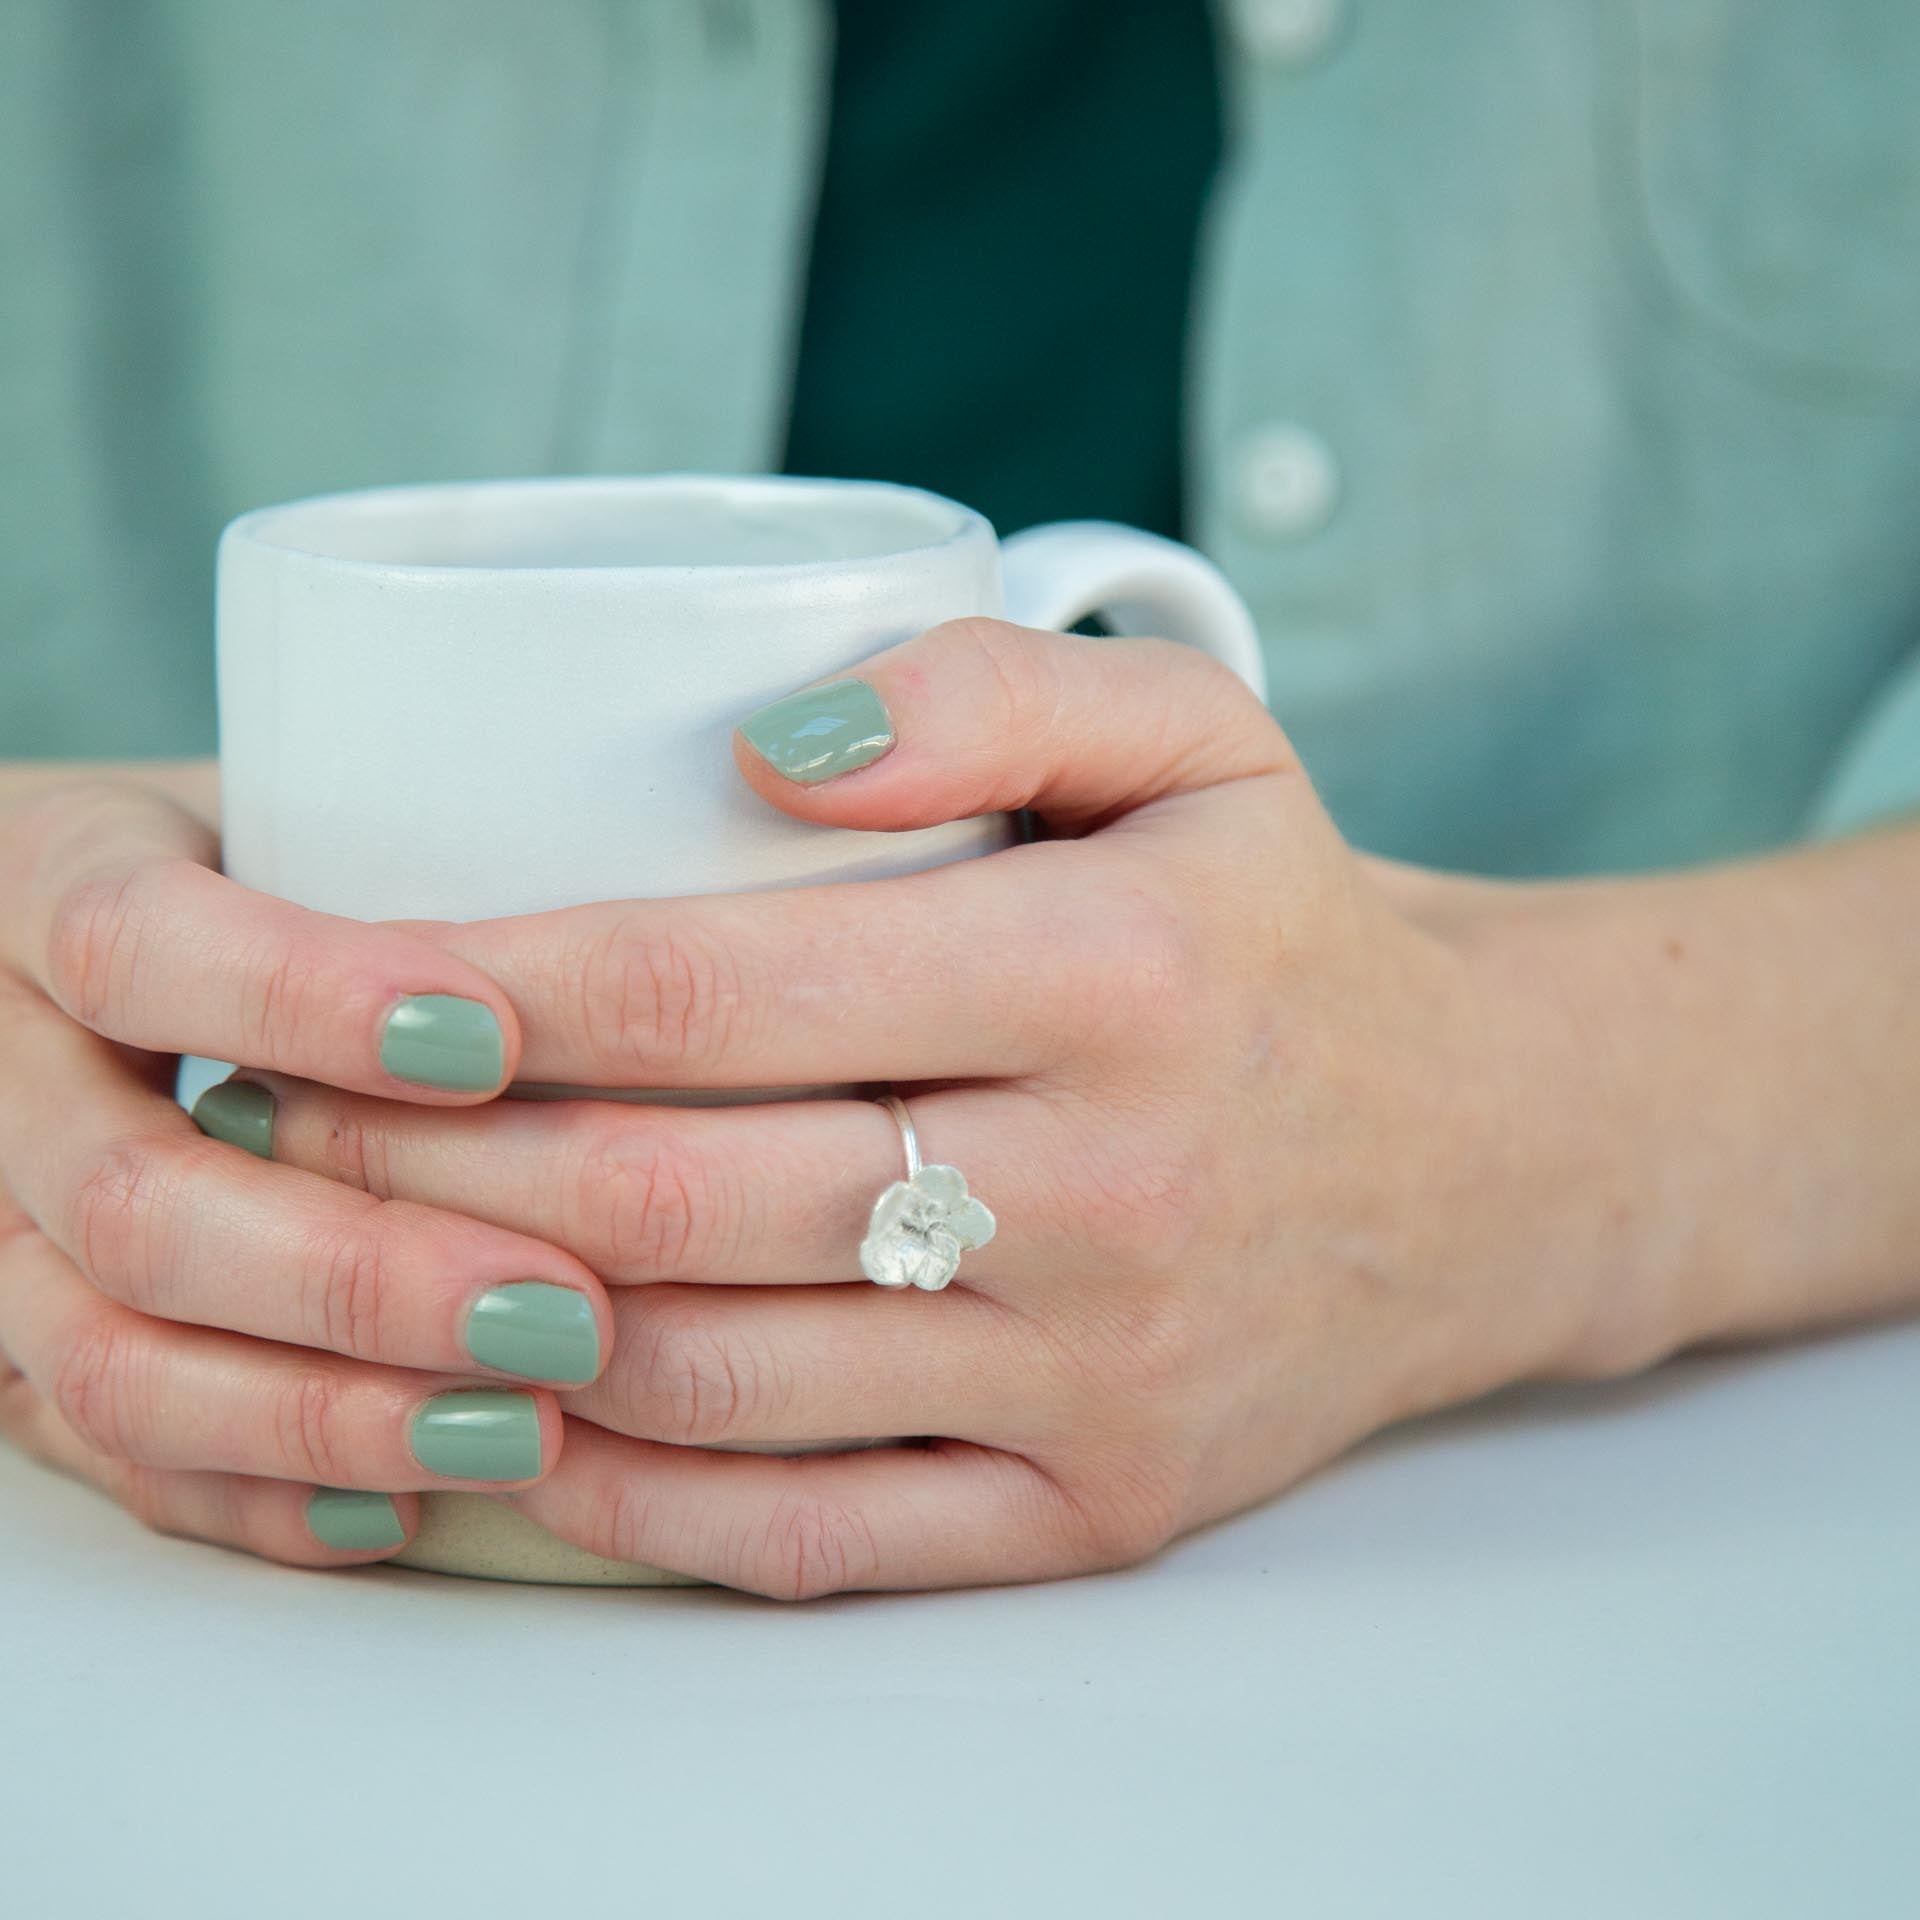 hands holding mug with silver flower ring